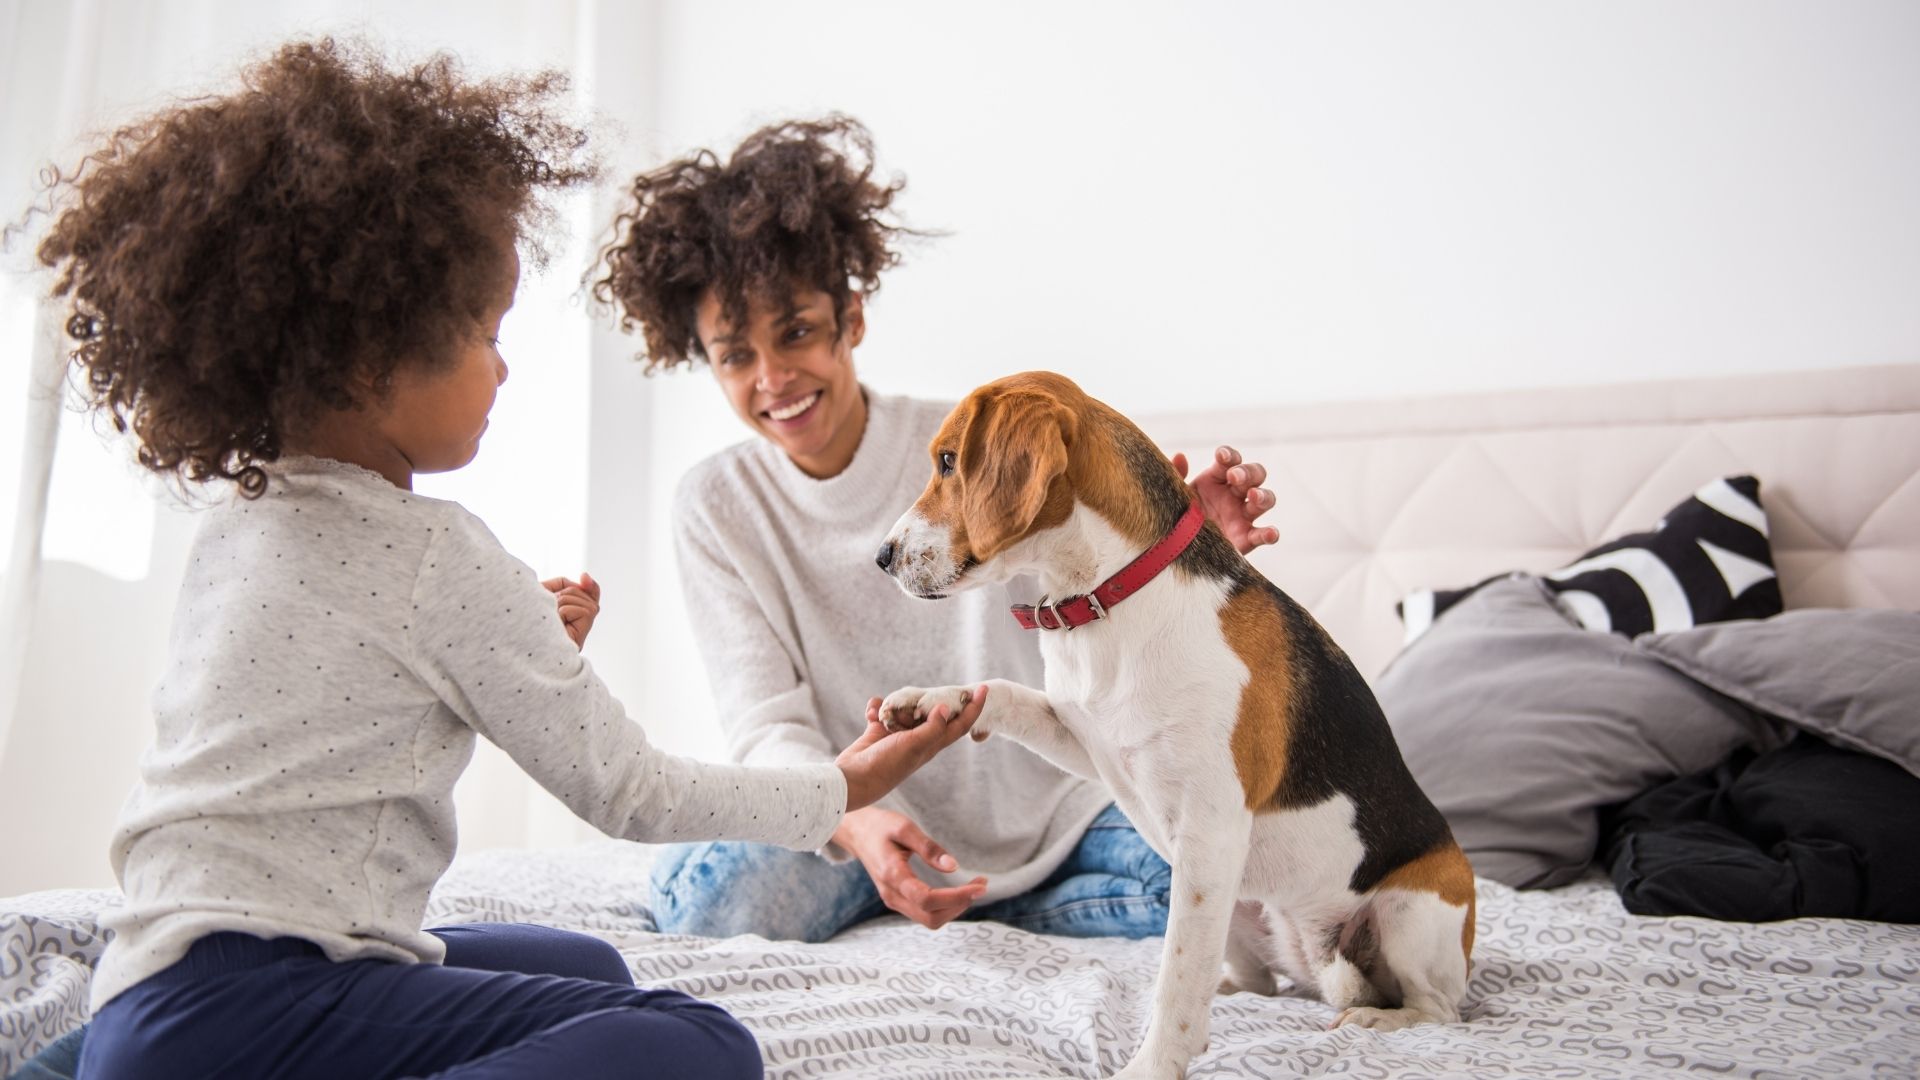 What To Know Before Buying Your Child a Pet